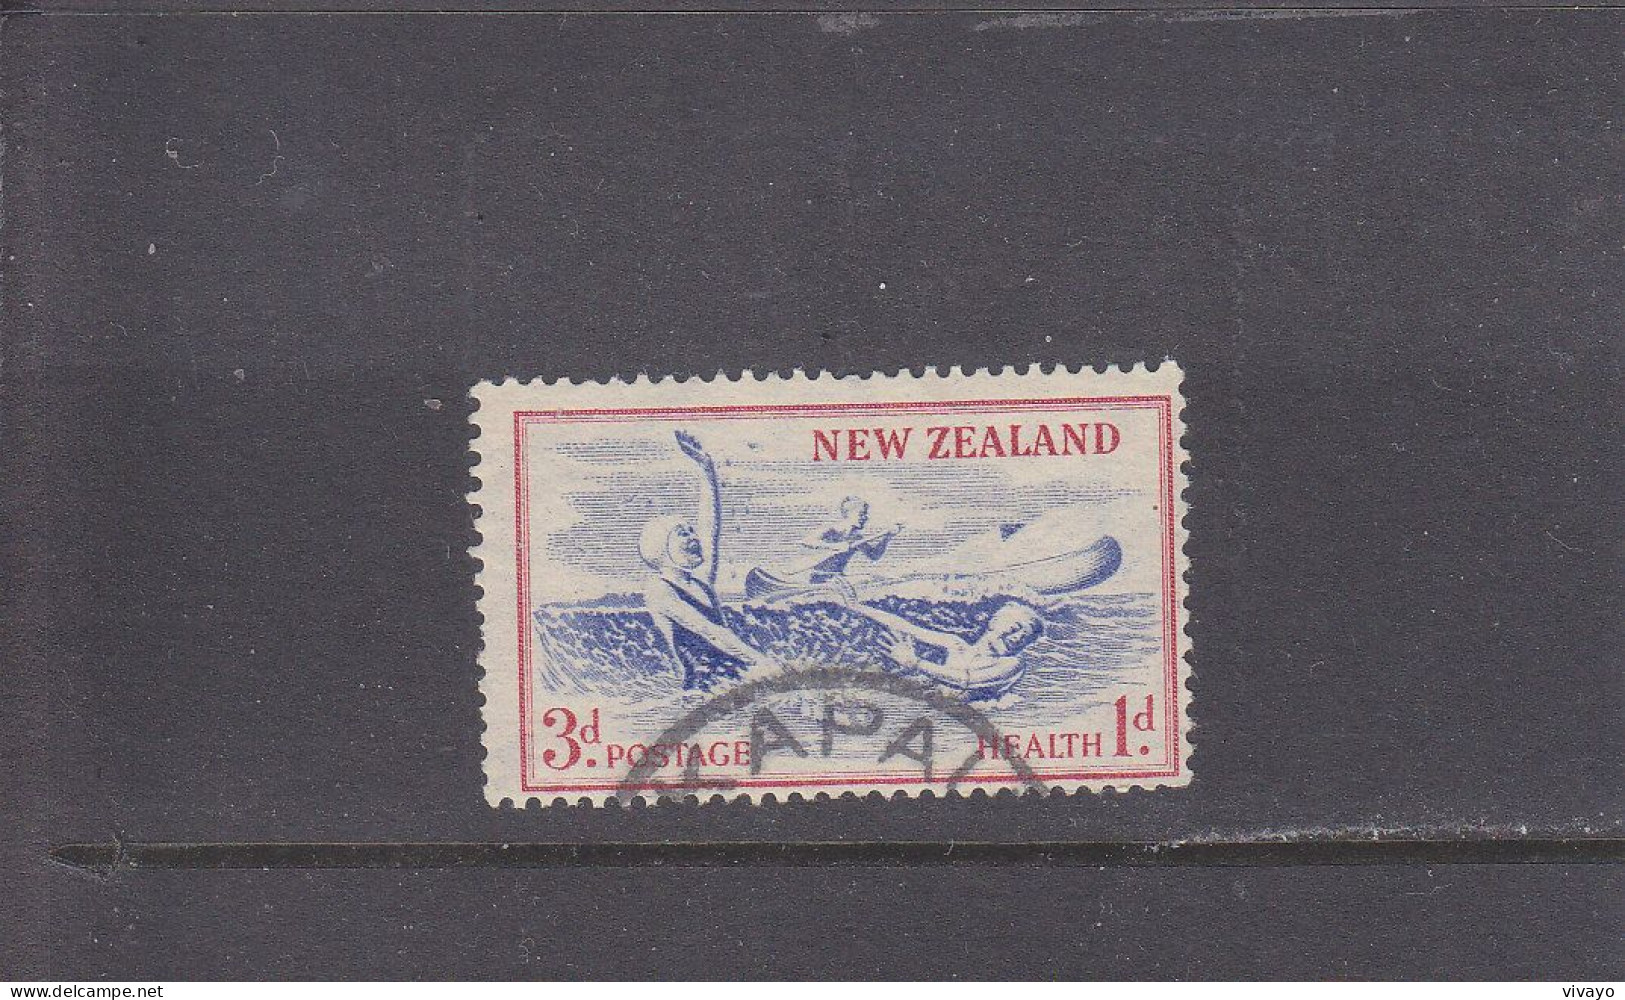 NEW ZEALAND - O / FINE CANCELLED - 1957 - HEALTH - SWIMMING -   Yv. 263 - Mi. 372 - Used Stamps